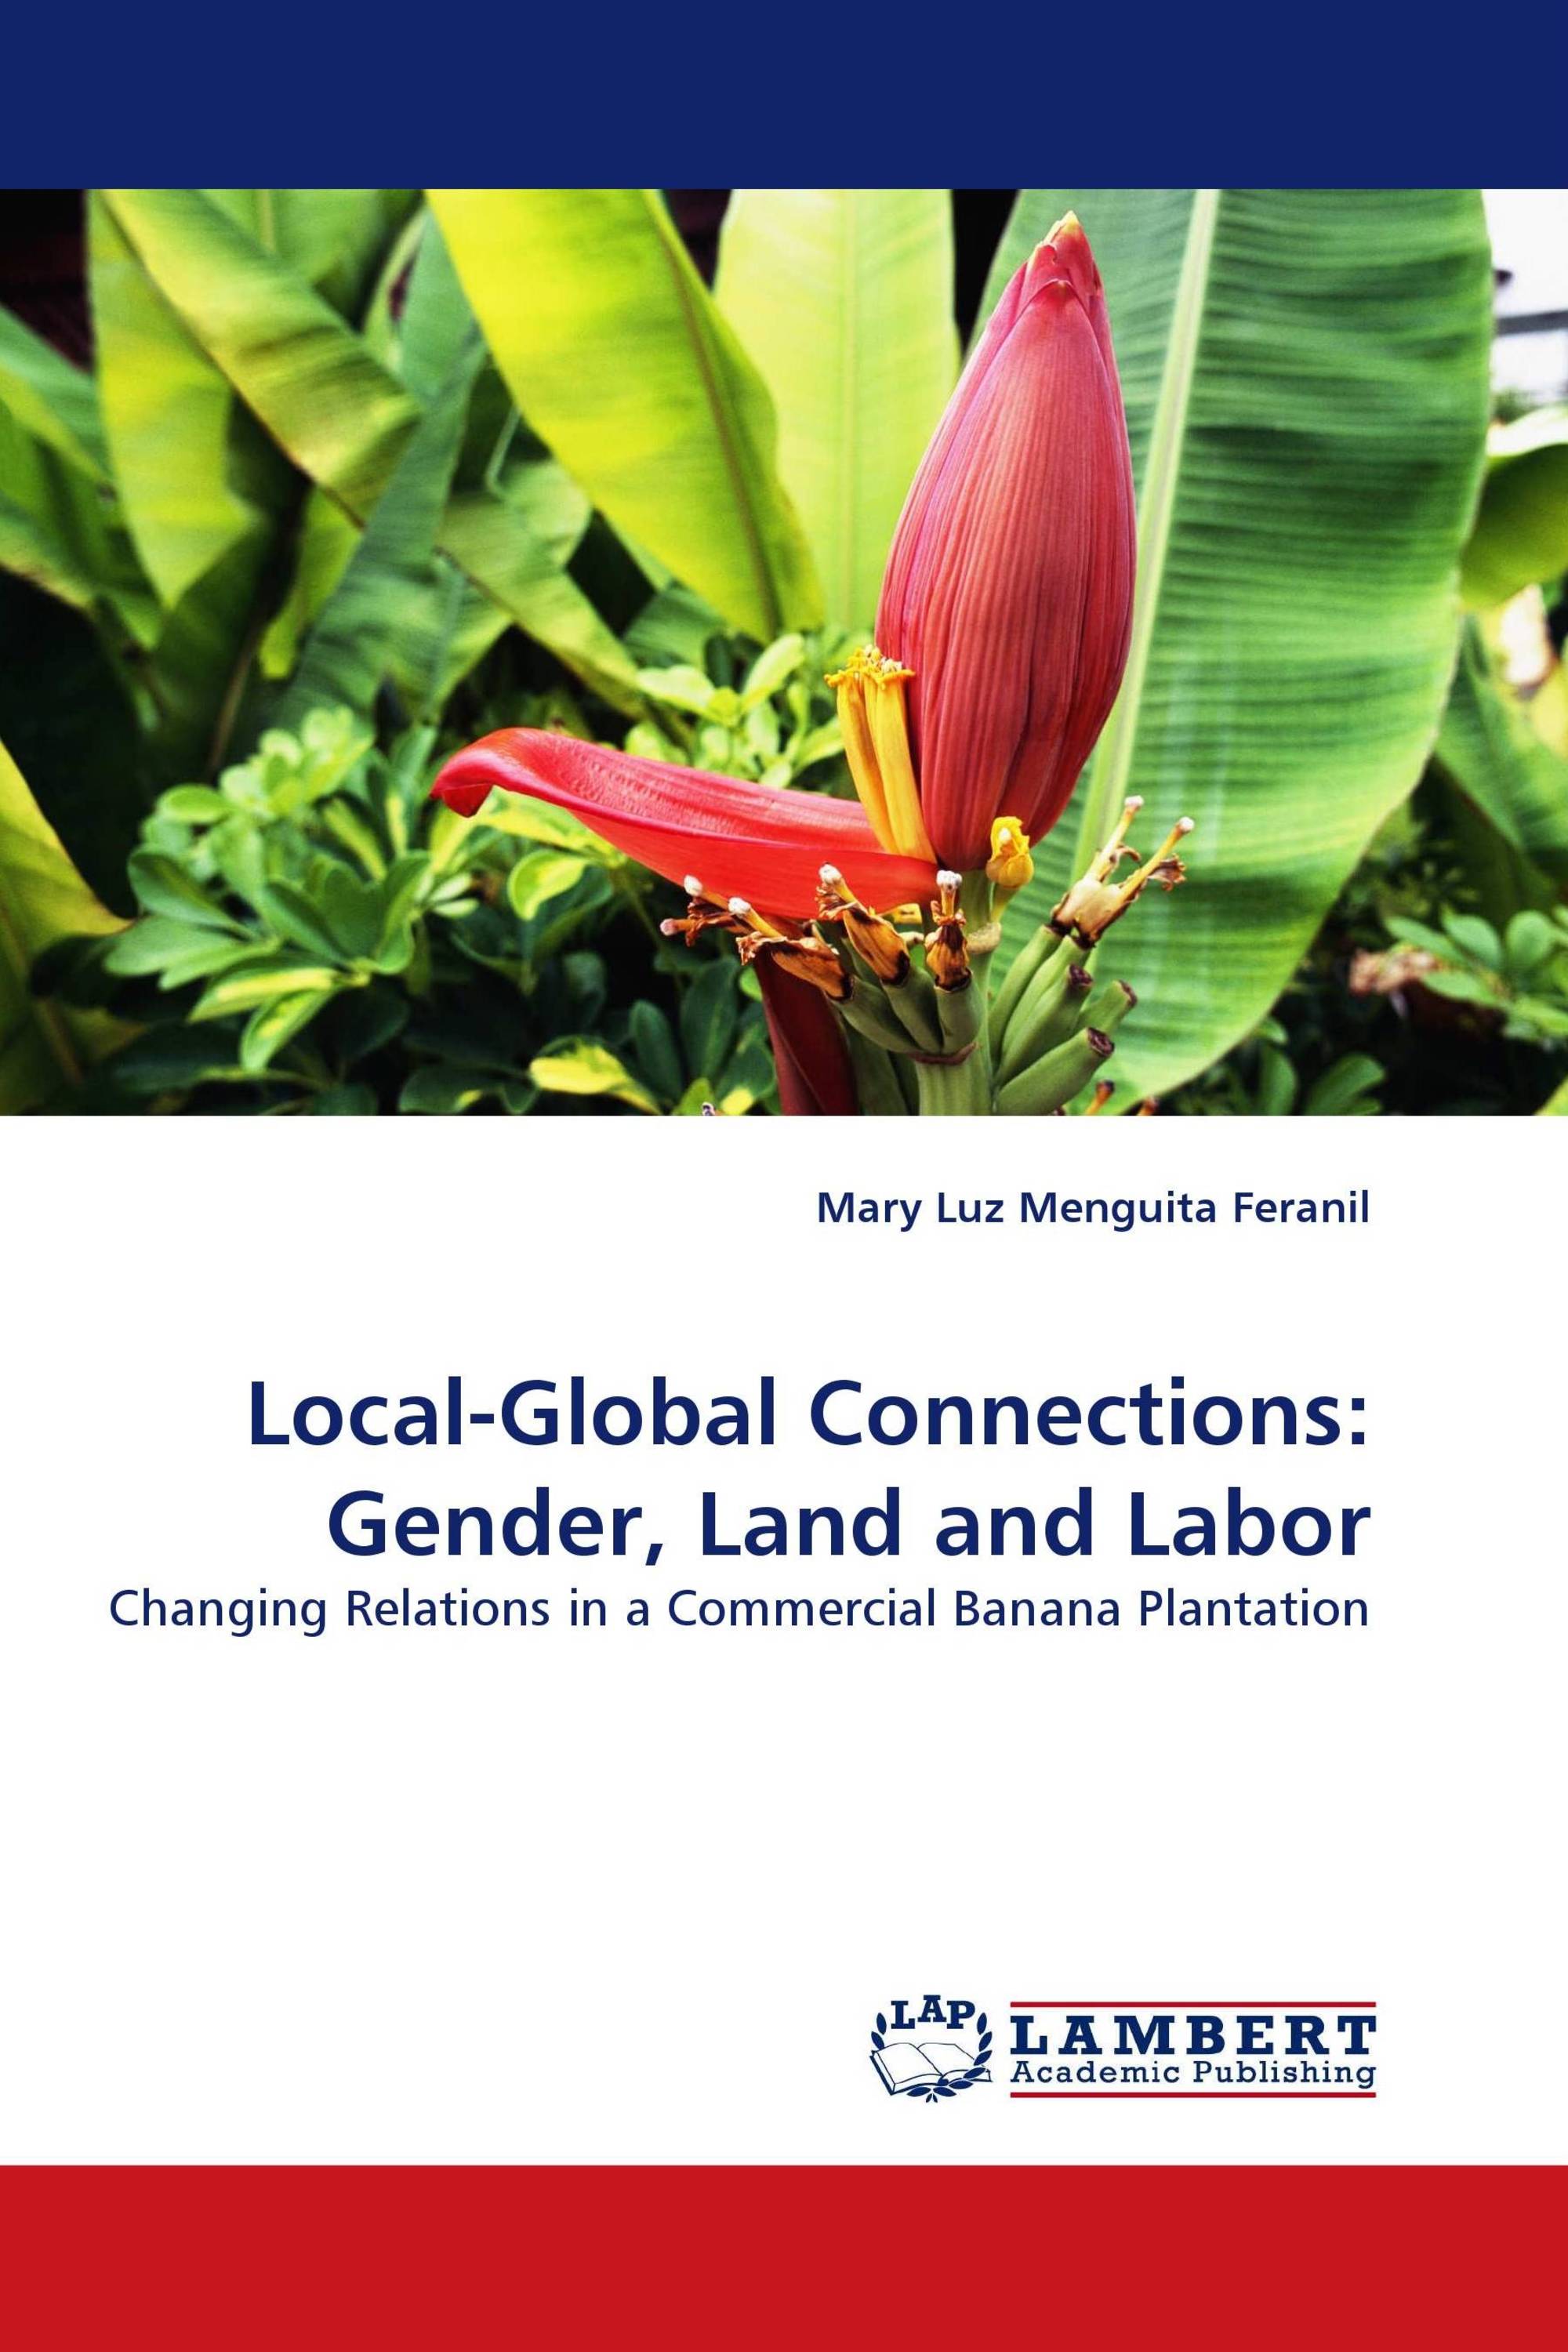 Local-Global Connections: Gender, Land and Labor